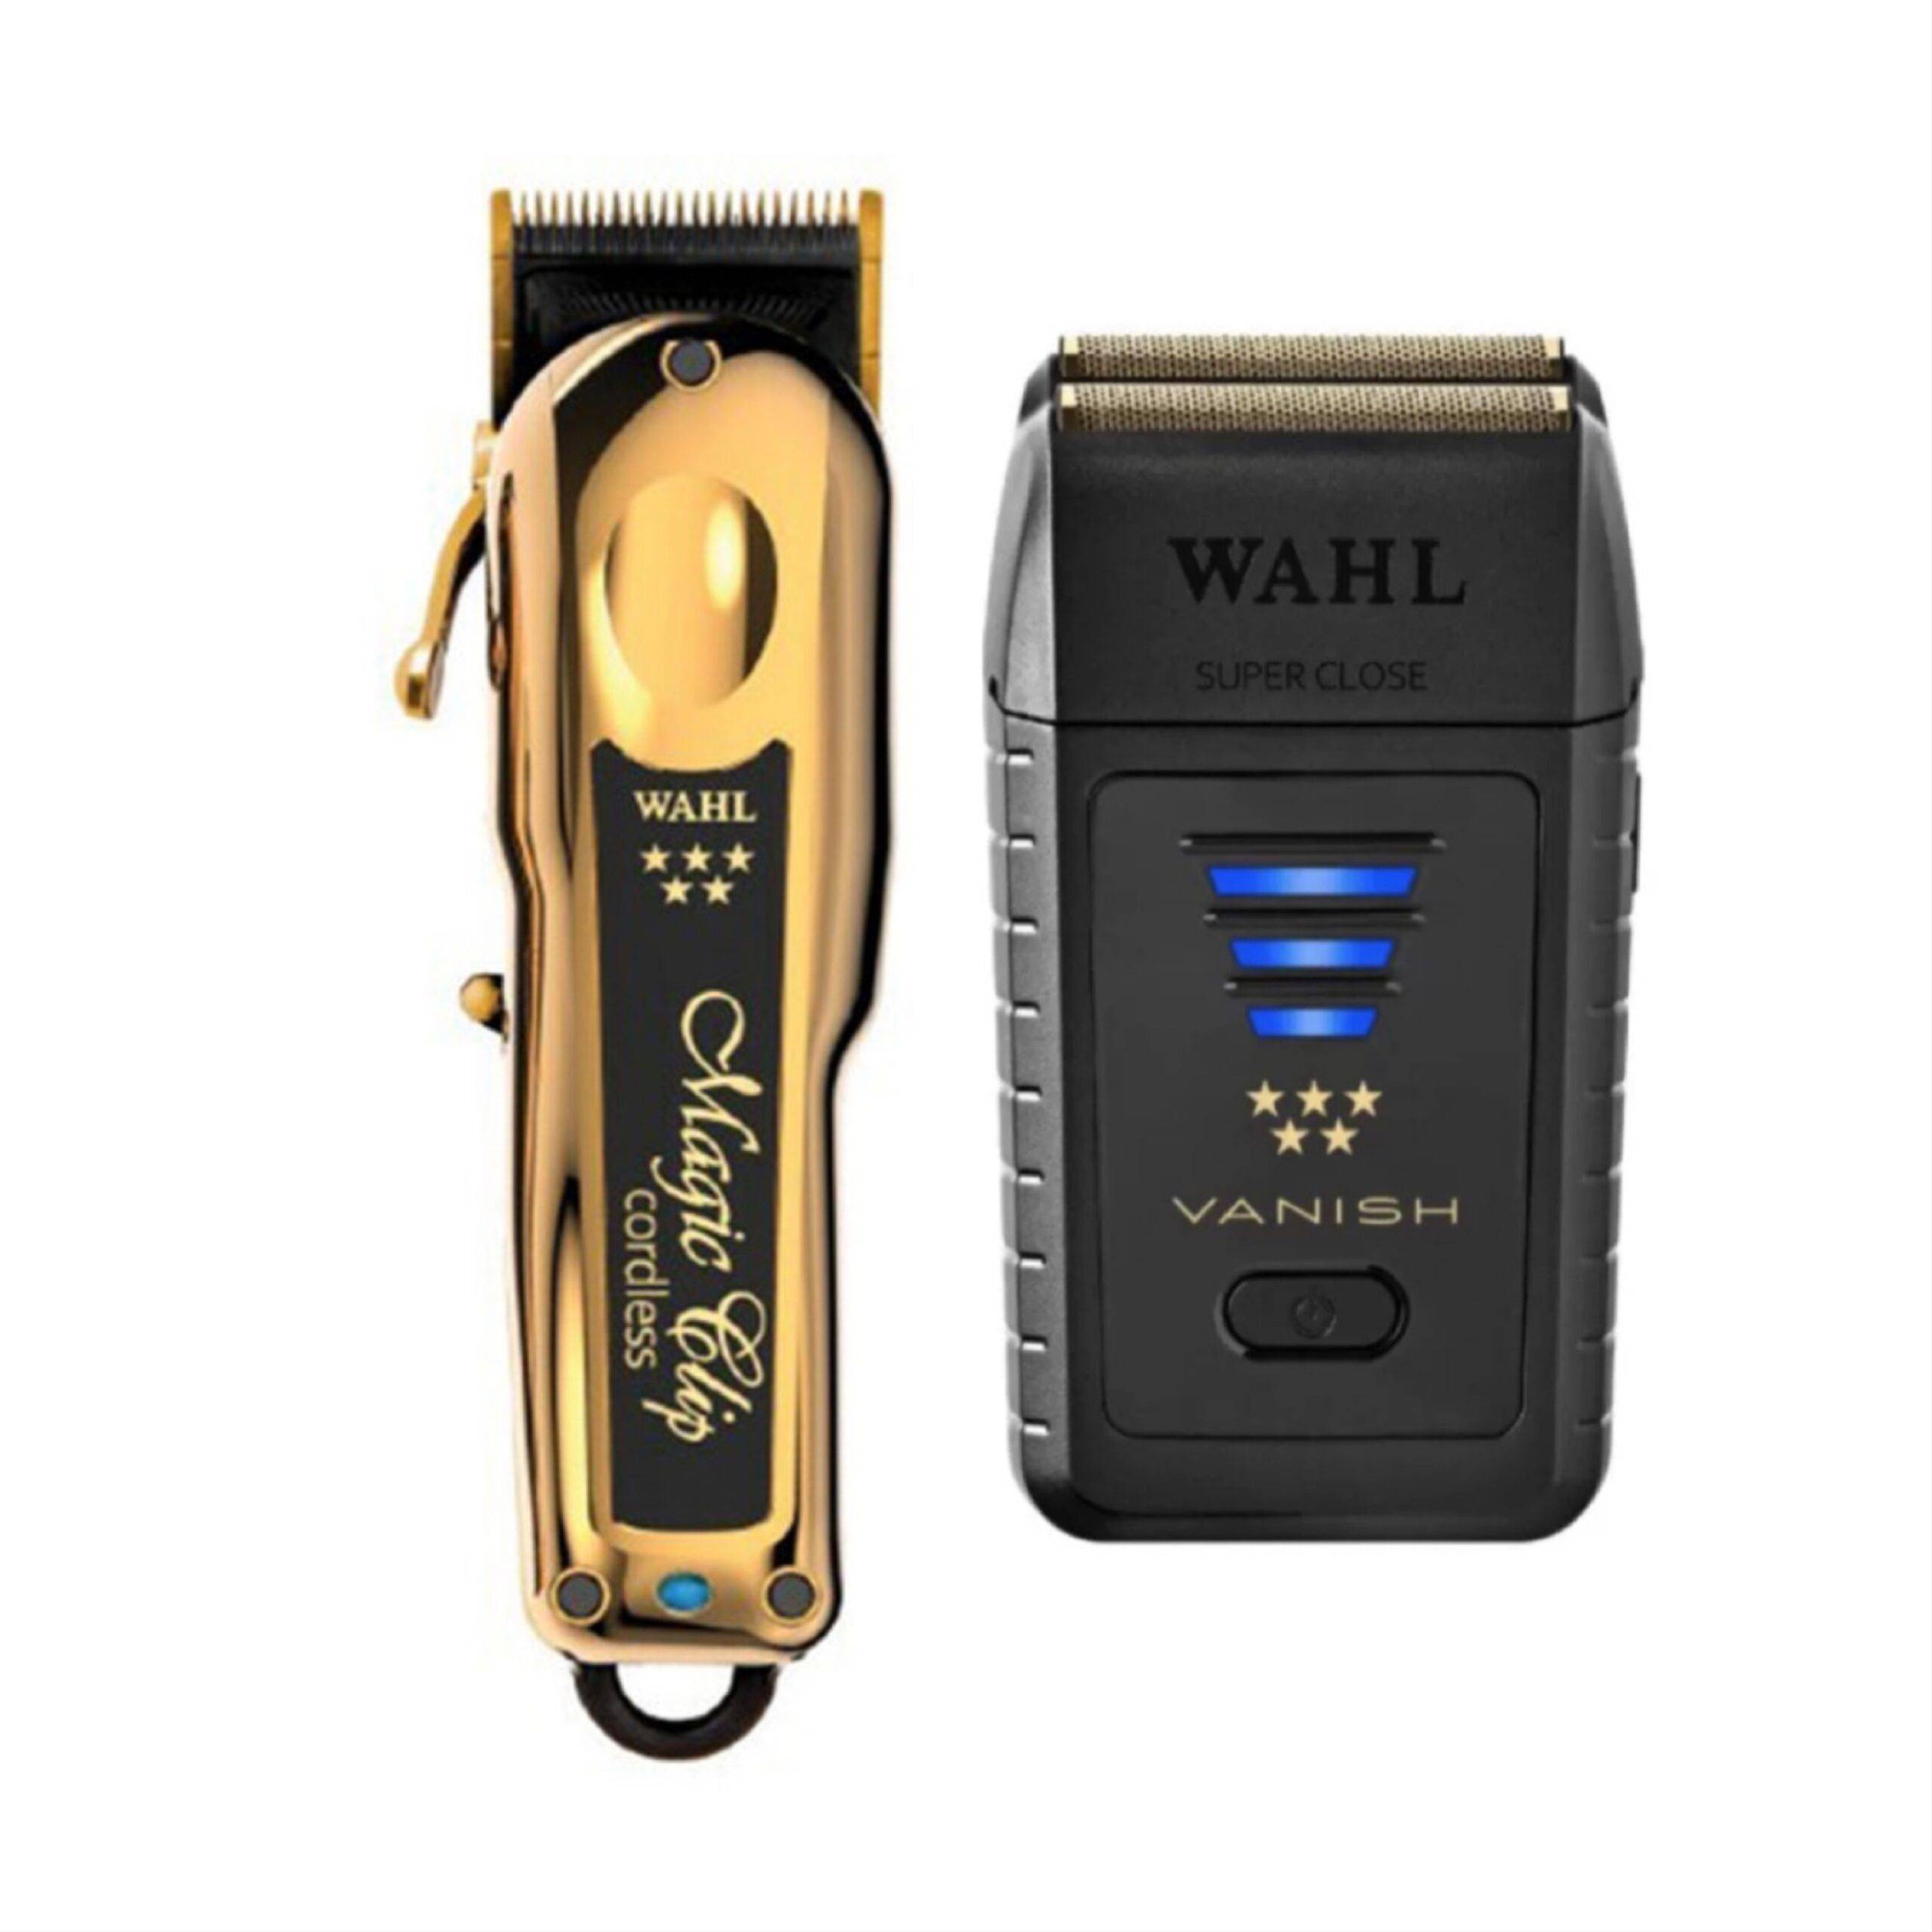 Wahl Pro 2pc Gold Limited Edition Combo by ibs - Gold Magic clip Cordless